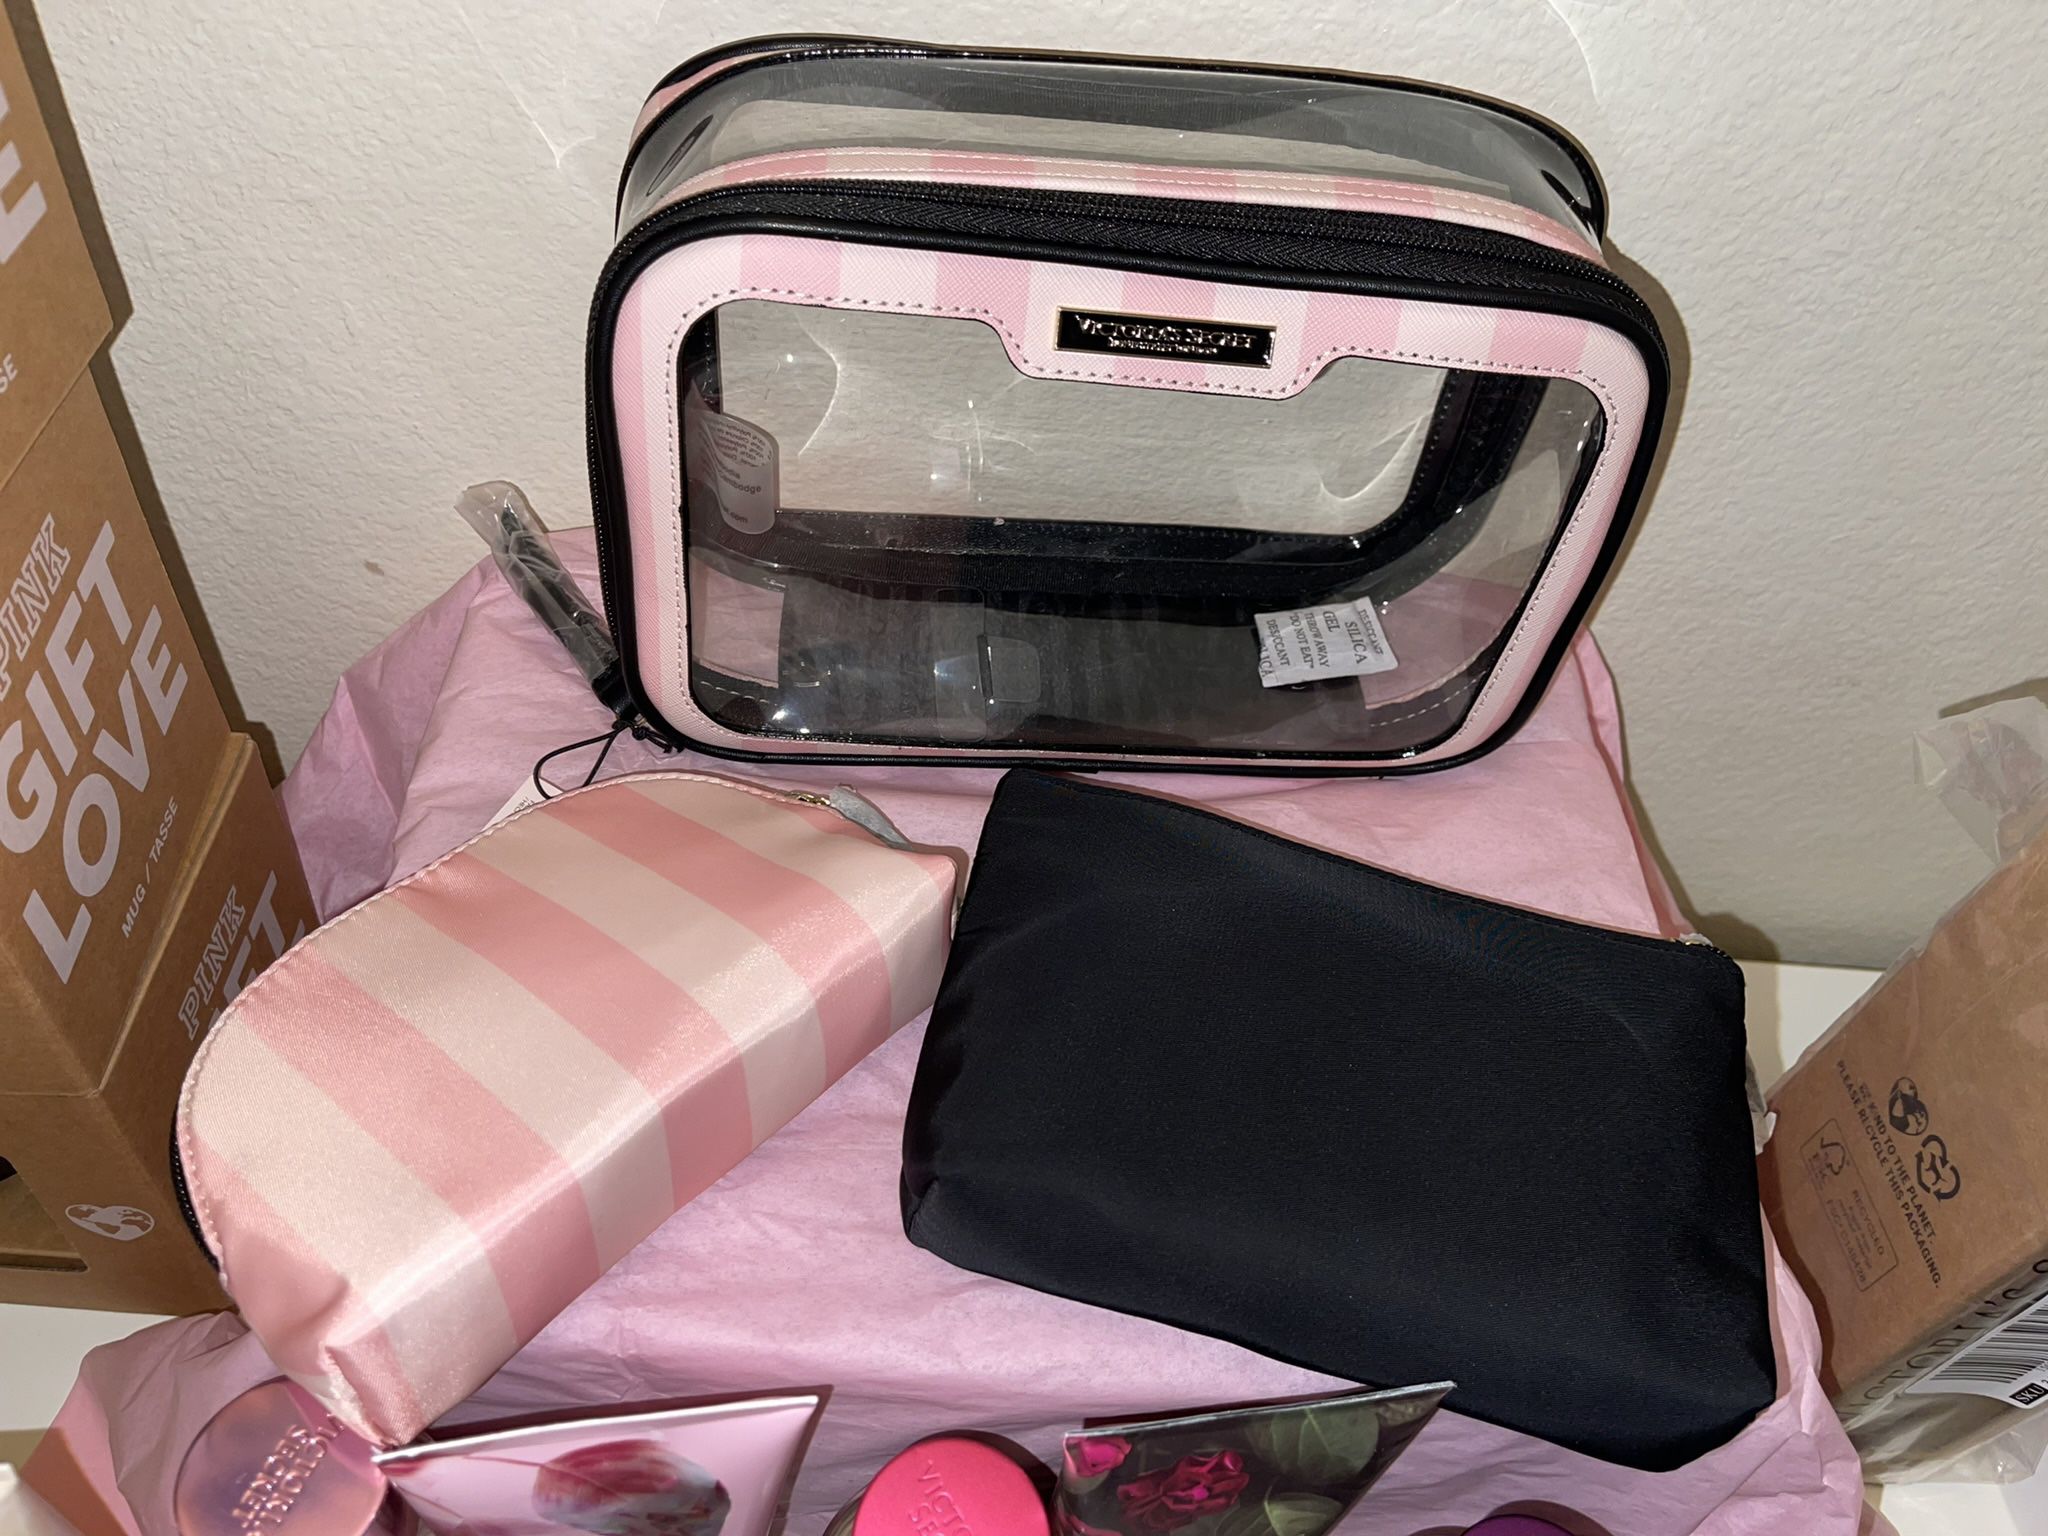 Victoria's Secret Makeup Bag, Beauty & Personal Care, Fragrance &  Deodorants on Carousell